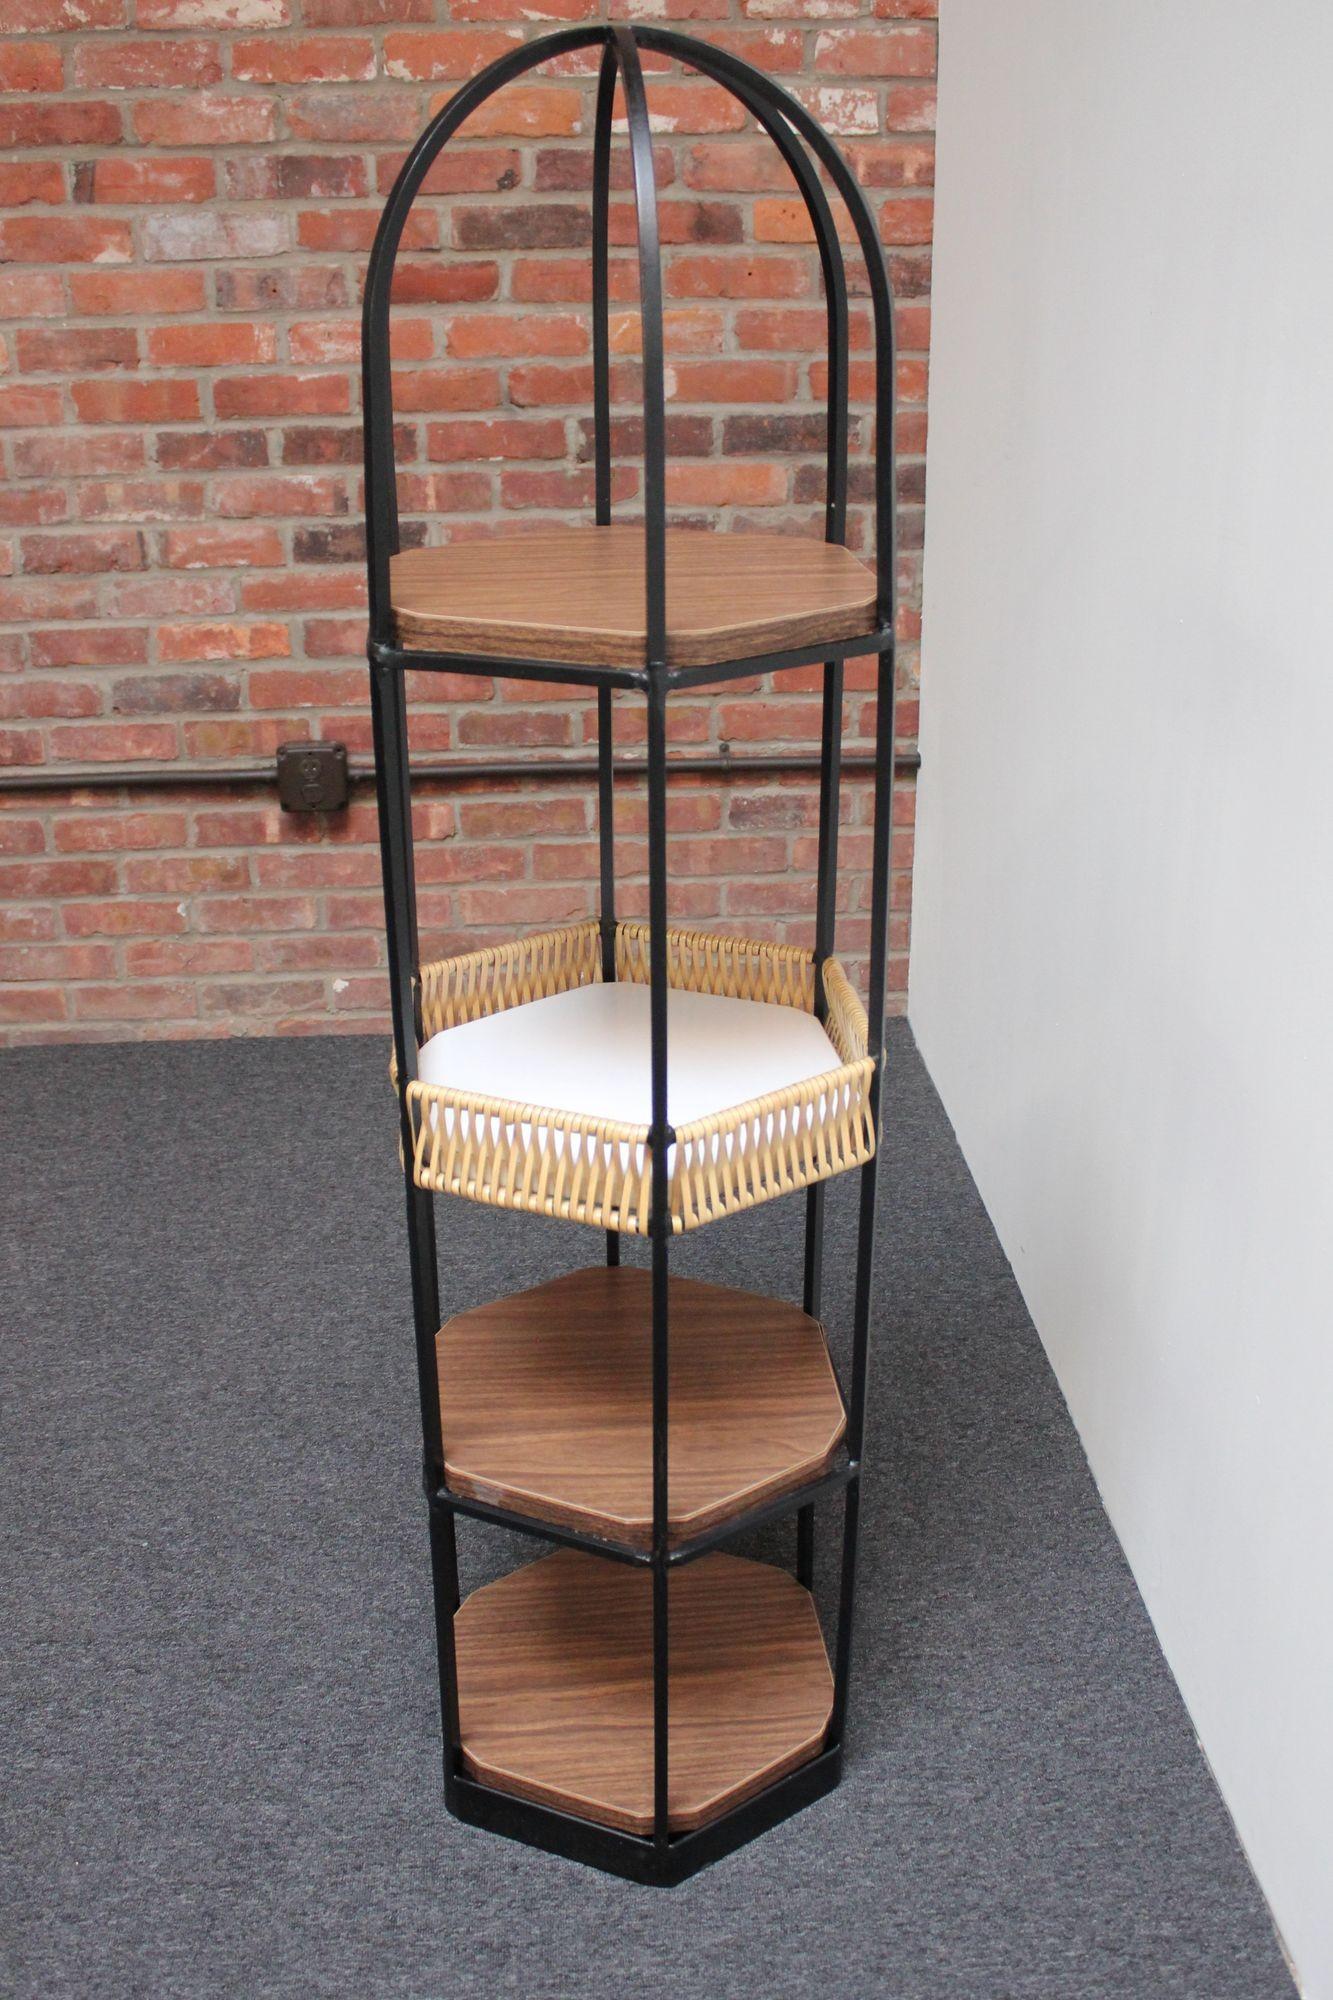 Sculptural wrought iron shelving unit designed by Arthur Umanoff for Shaver Howard.
Unique, graceful form with three hexagonal shelves in faux wood grain laminated pressboard and a rattan basket. Practical, aesthetically pleasing storage/display